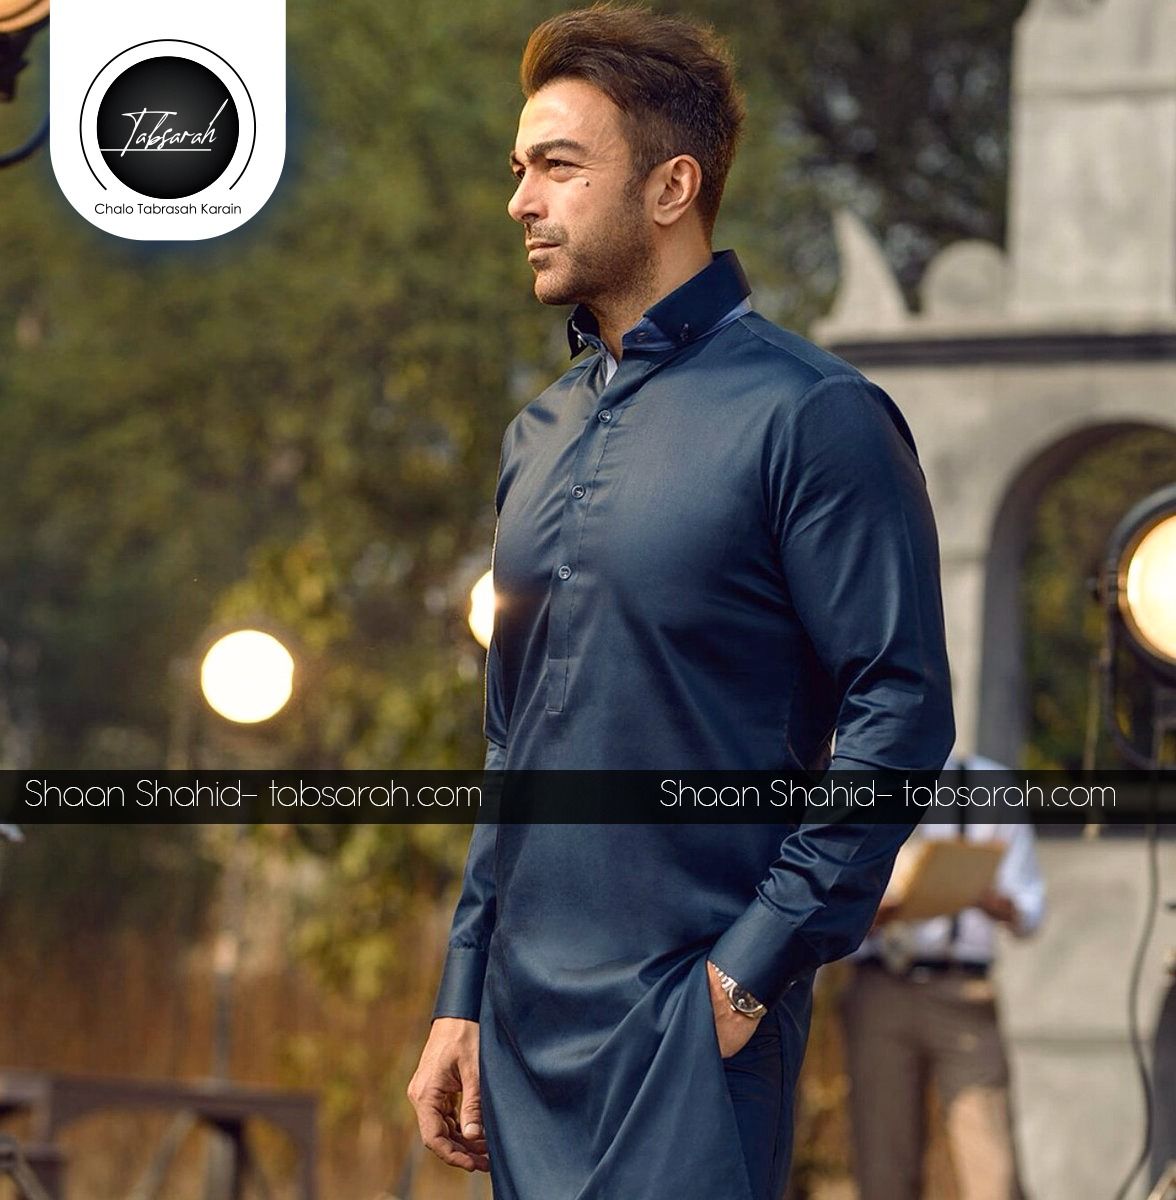 Shaan Shahid Biography, Age, Family, Acting, Affair, Marriage